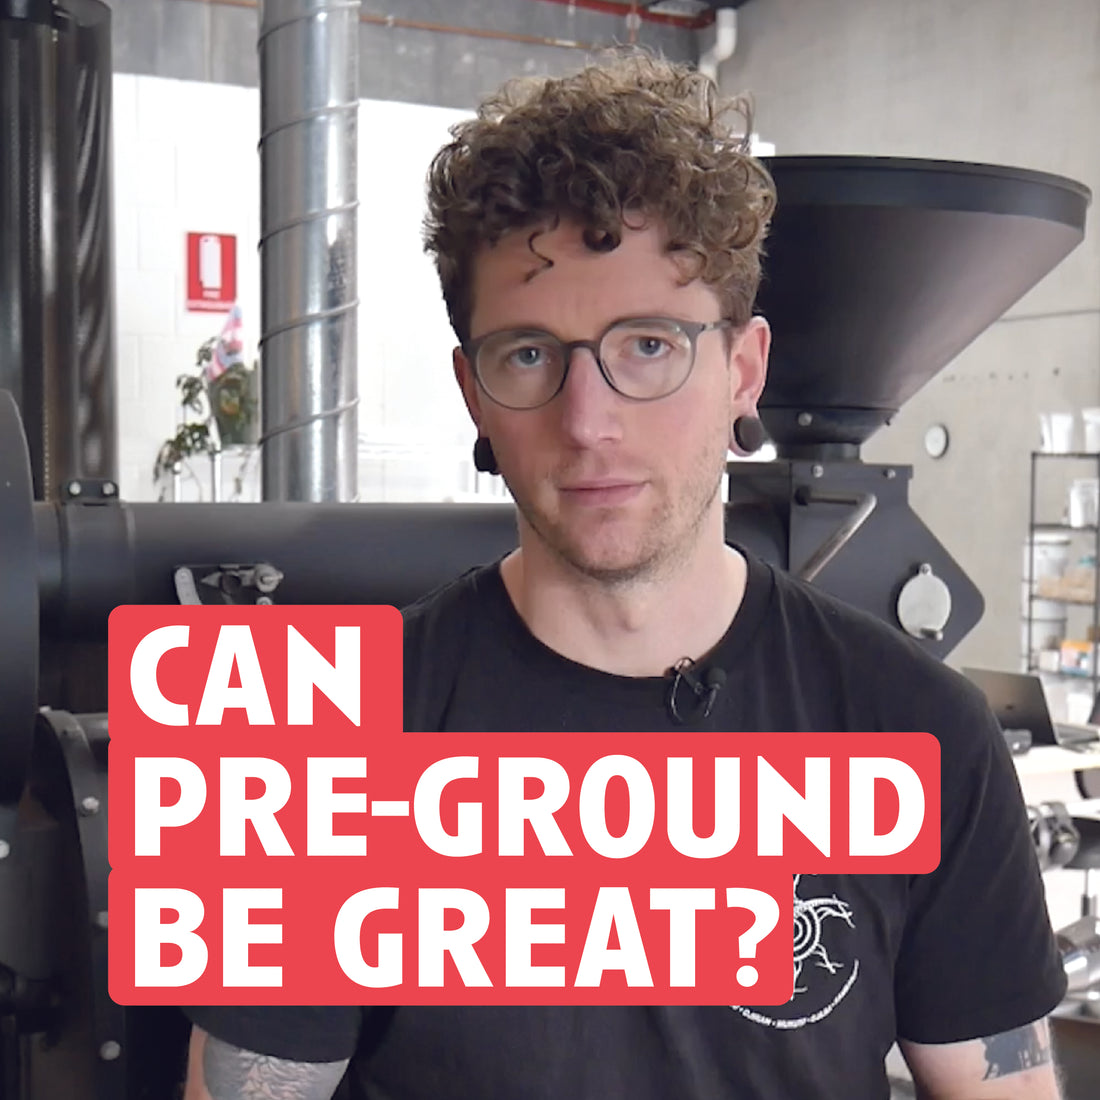 [Video Transcript] A Video About Pre-ground Coffee